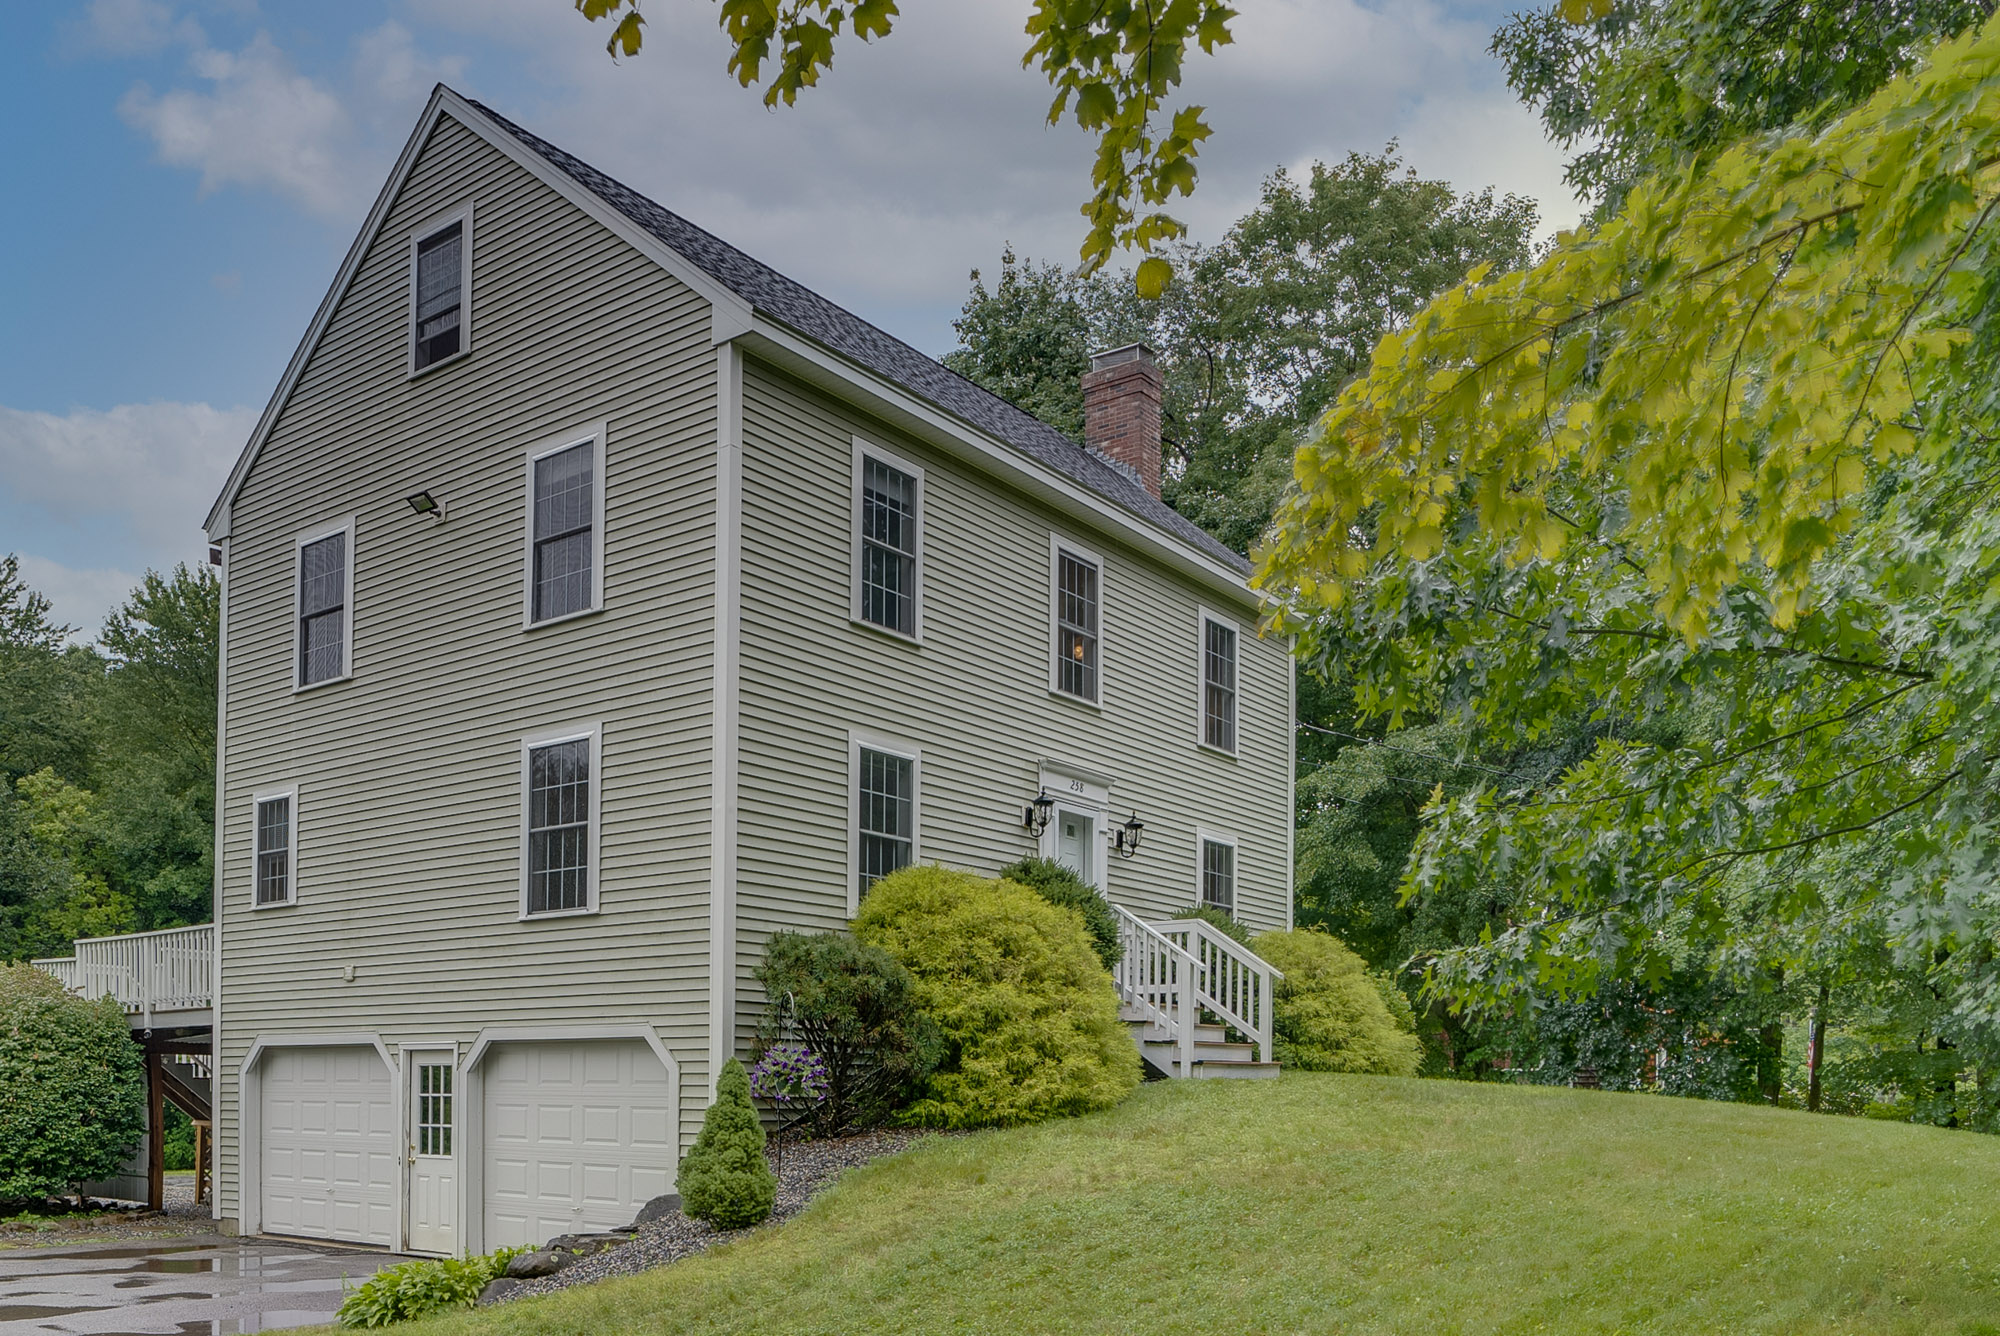 NEW to the RE Market in HAMPSTEAD, NH!